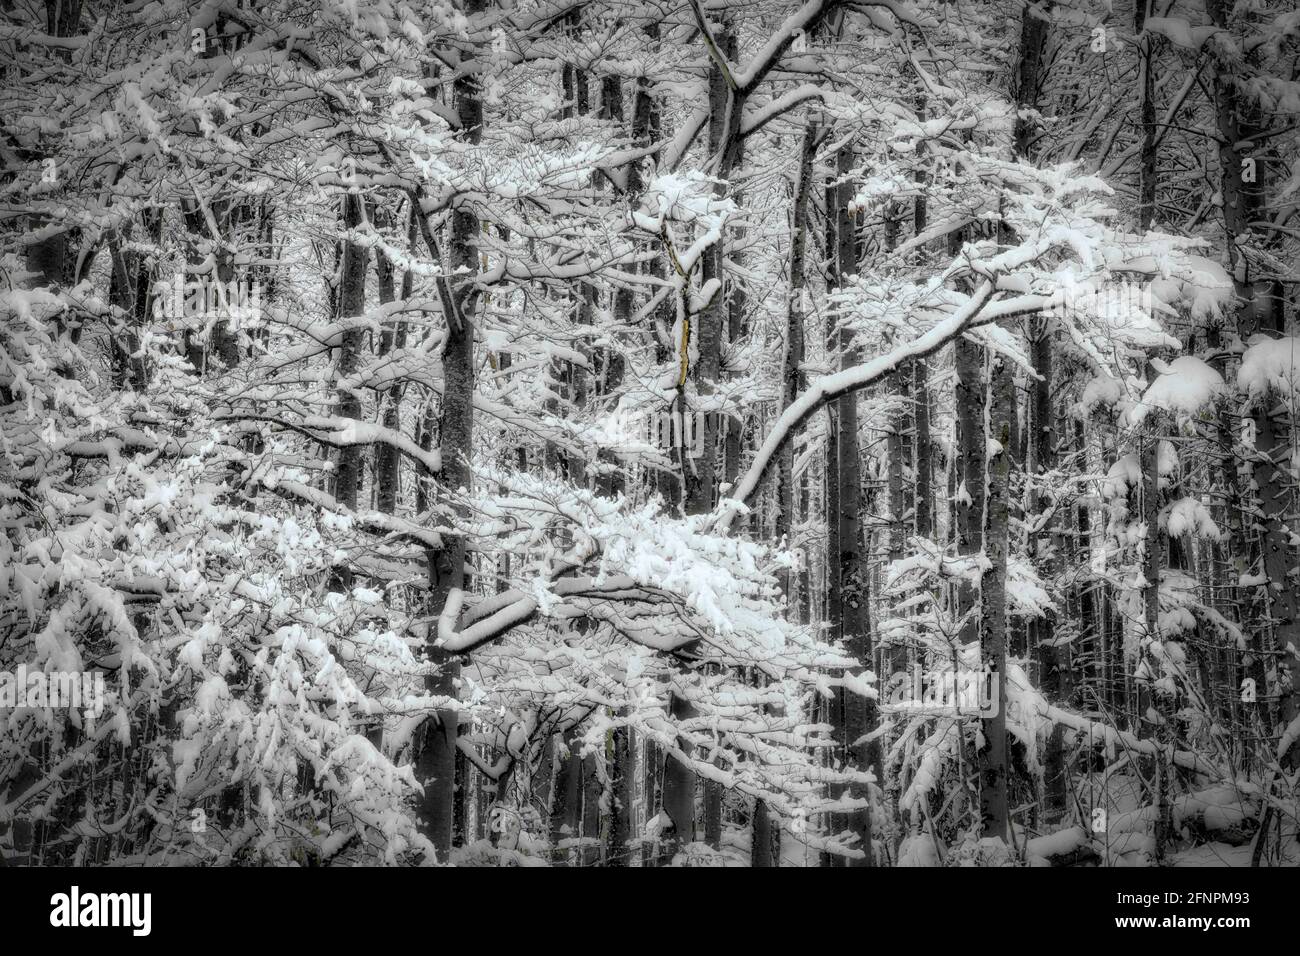 PHOTOGRAPHIC ART: A Winter Long Gone Stock Photo